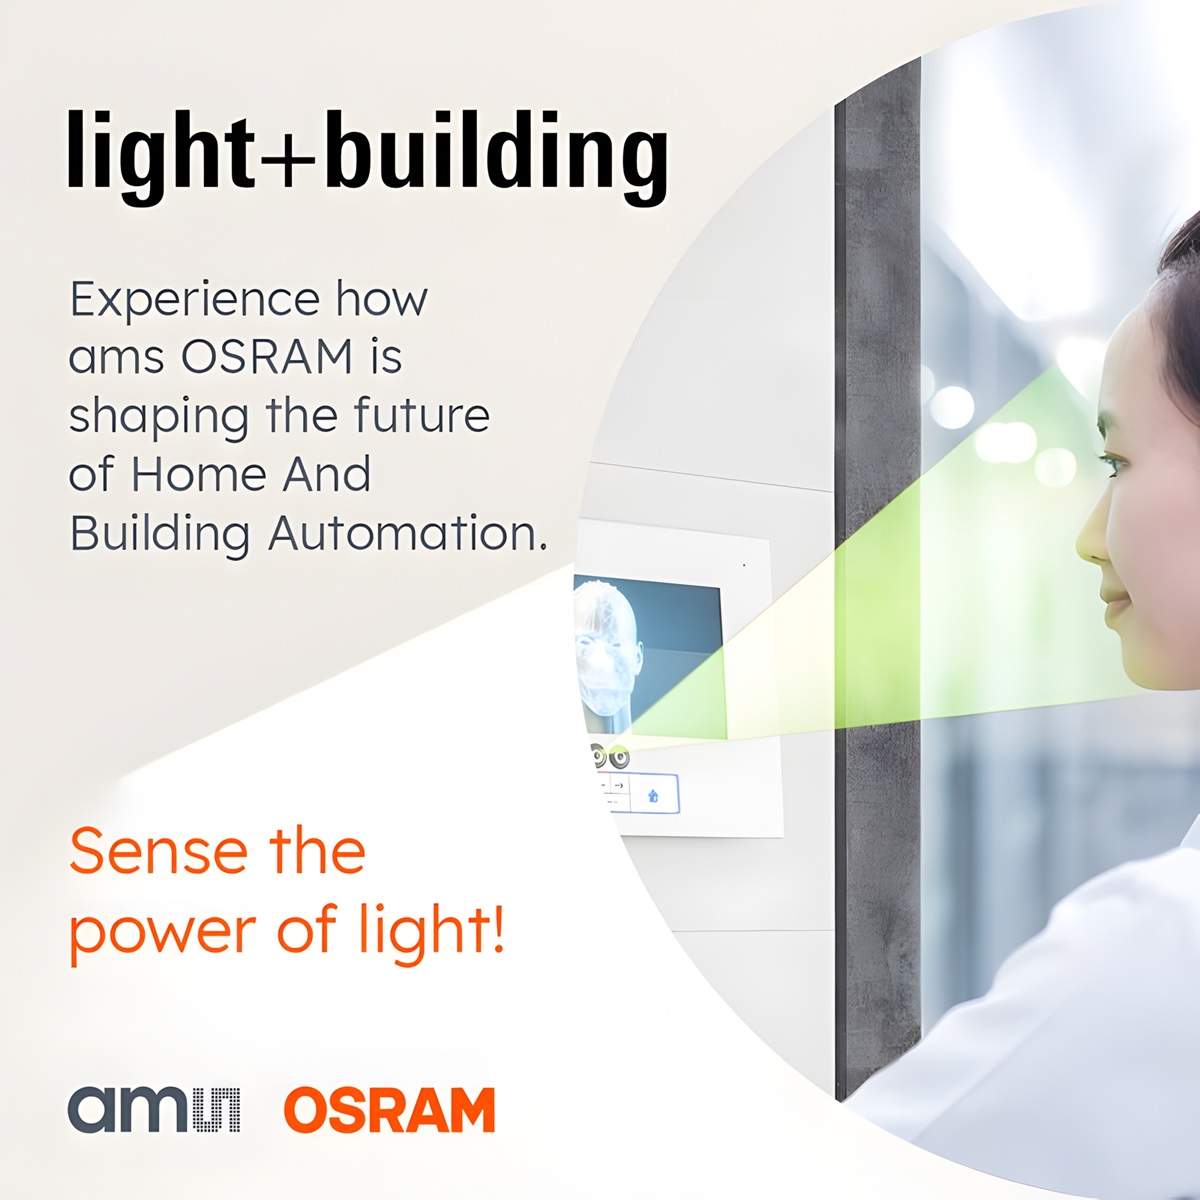 ams Osram to Showcase Innovative LEDs, Spectral and Ambient Light Sensors at Light + Building